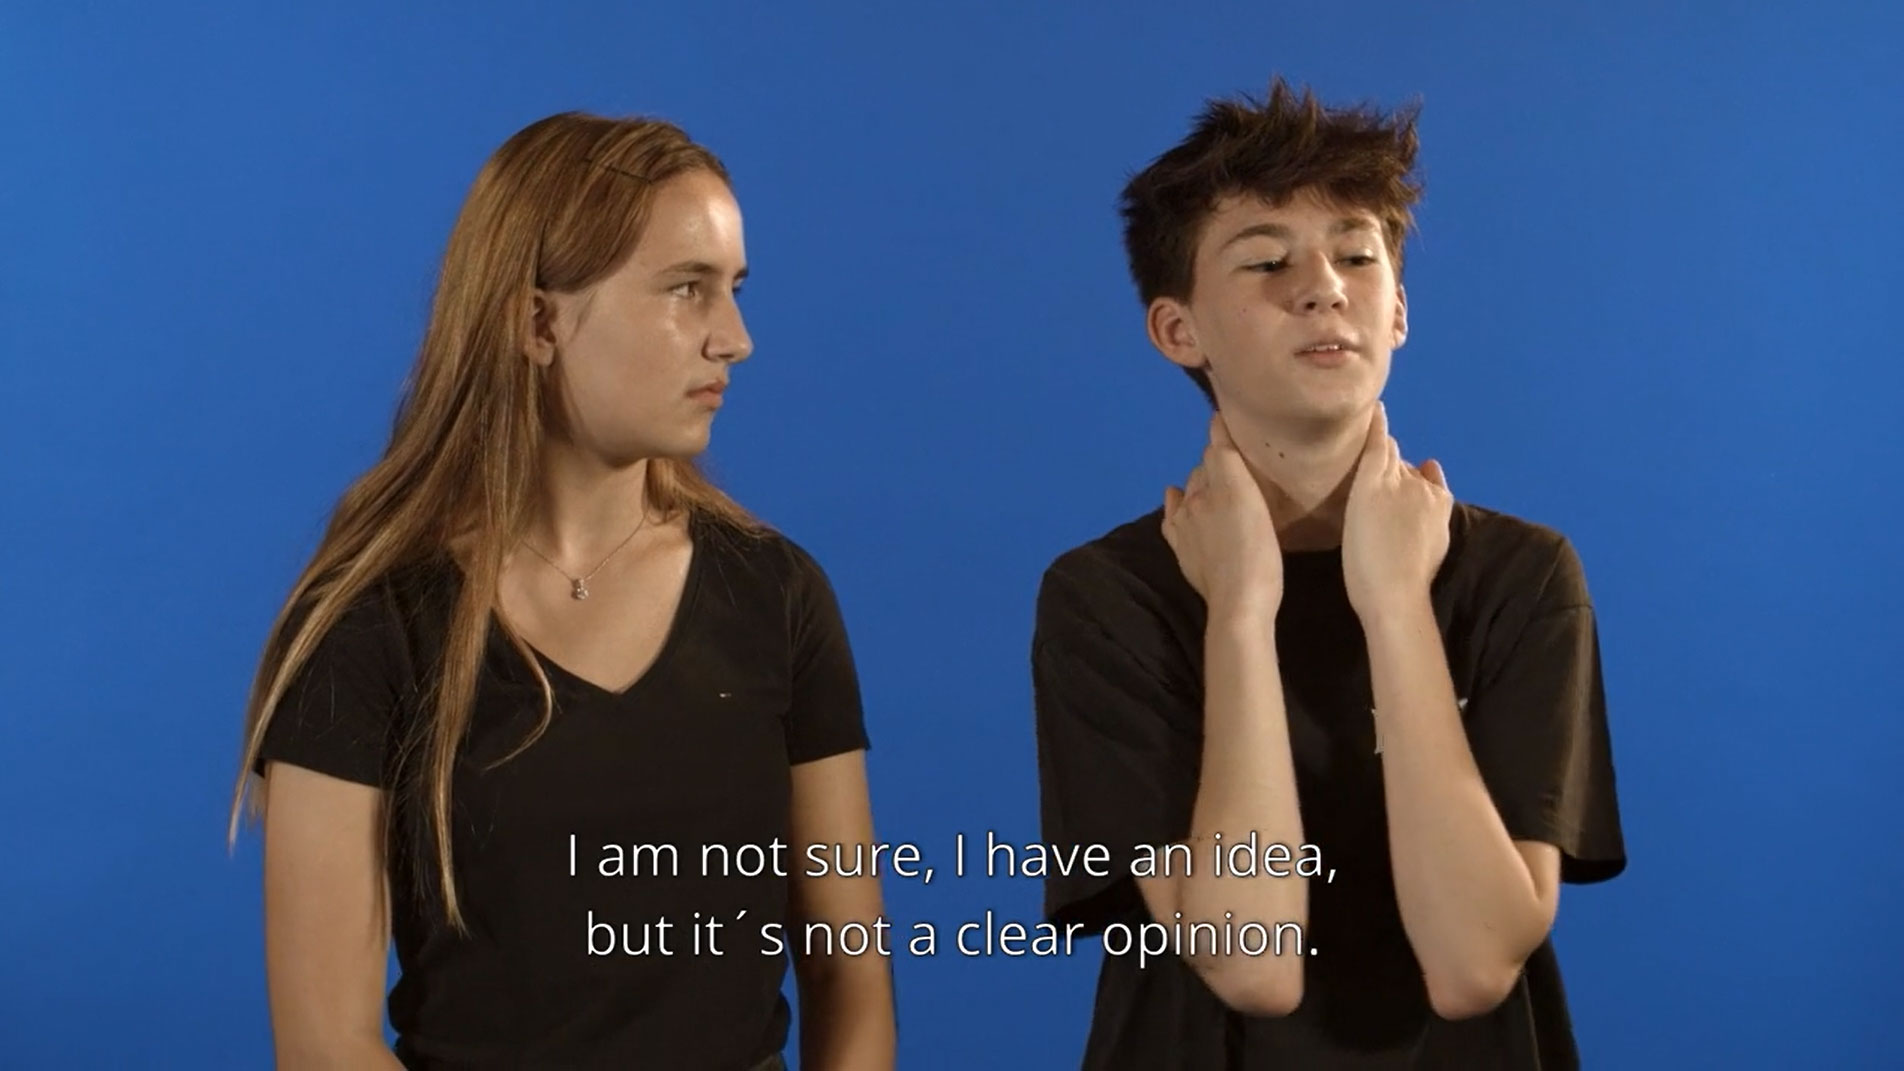 Lisa Rave, “WE ARE OCEAN” (a film made in collaboration with secondary school students in Berlin and in Brandenburg), 2019